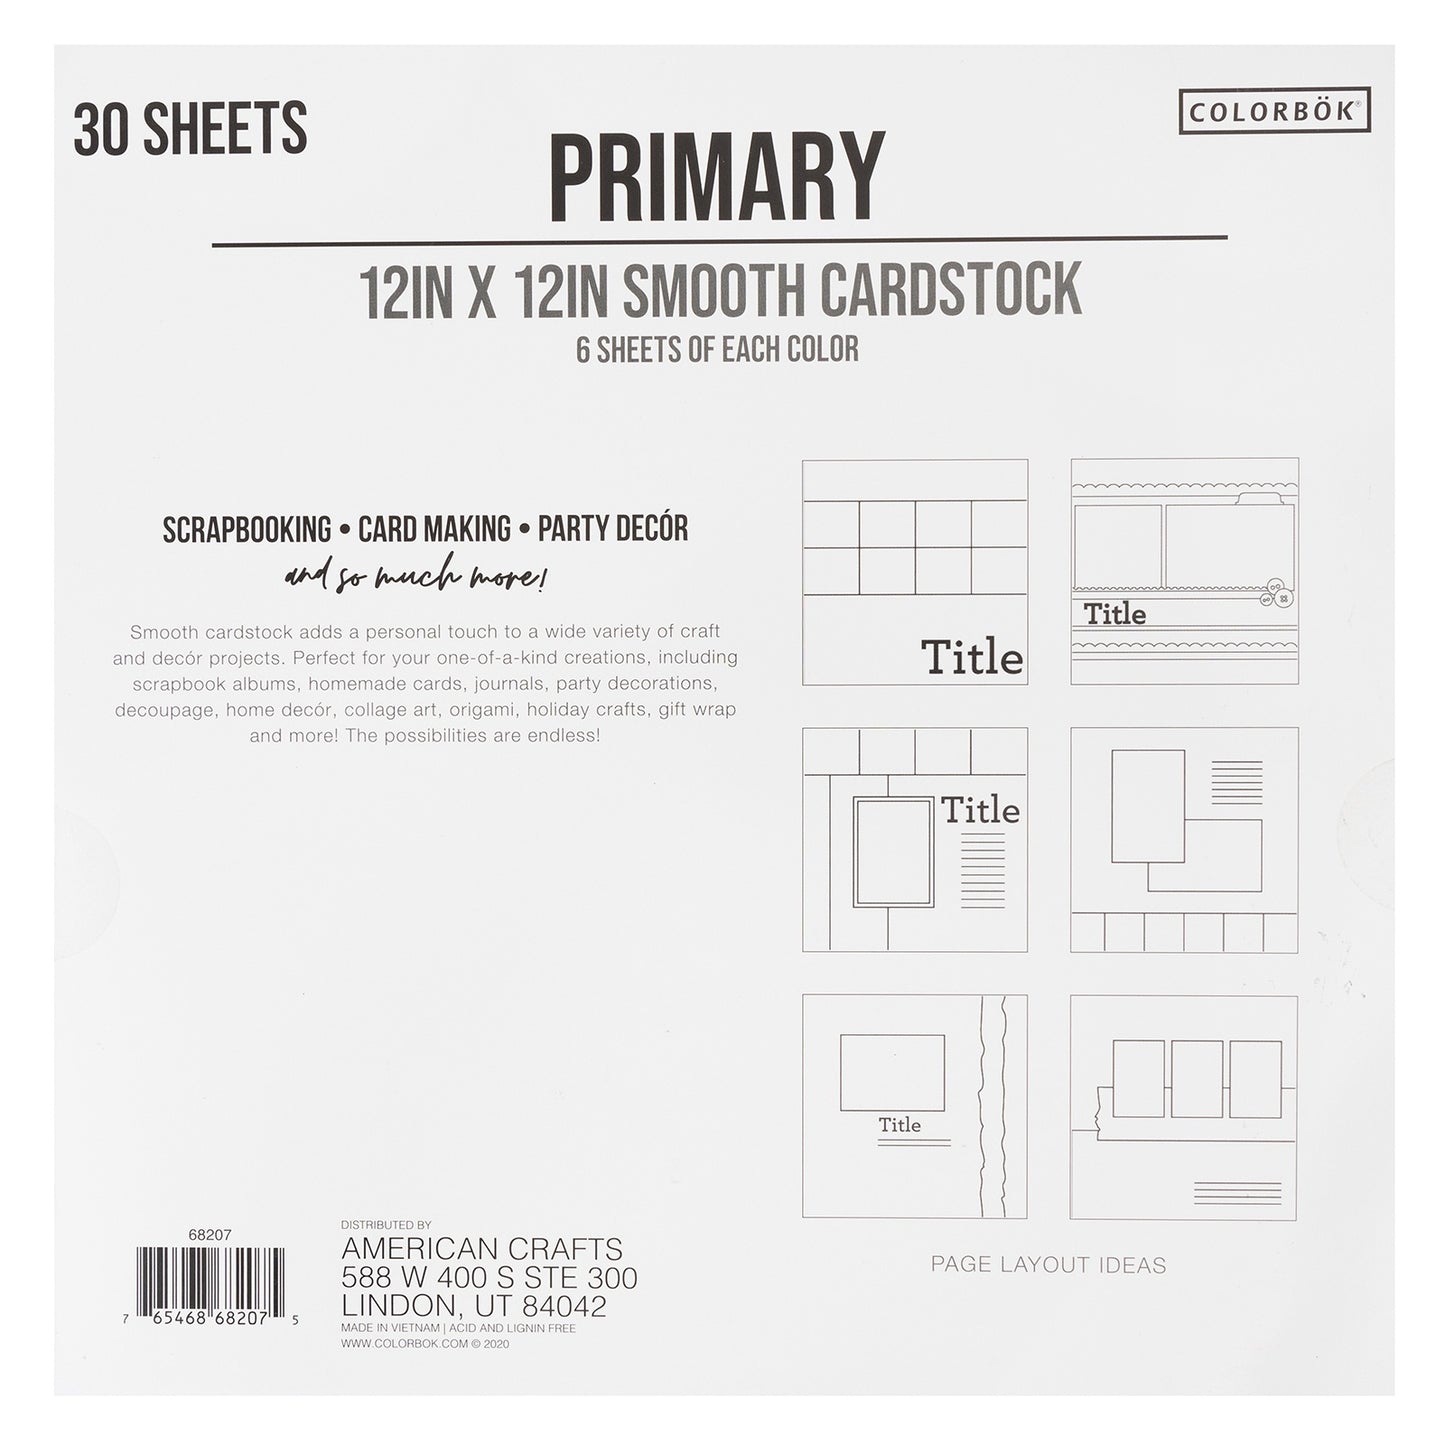 Colorbok 78lb Smooth Cardstock 12"X12" 30/Pkg-Primary, 5 Colors/6 Each